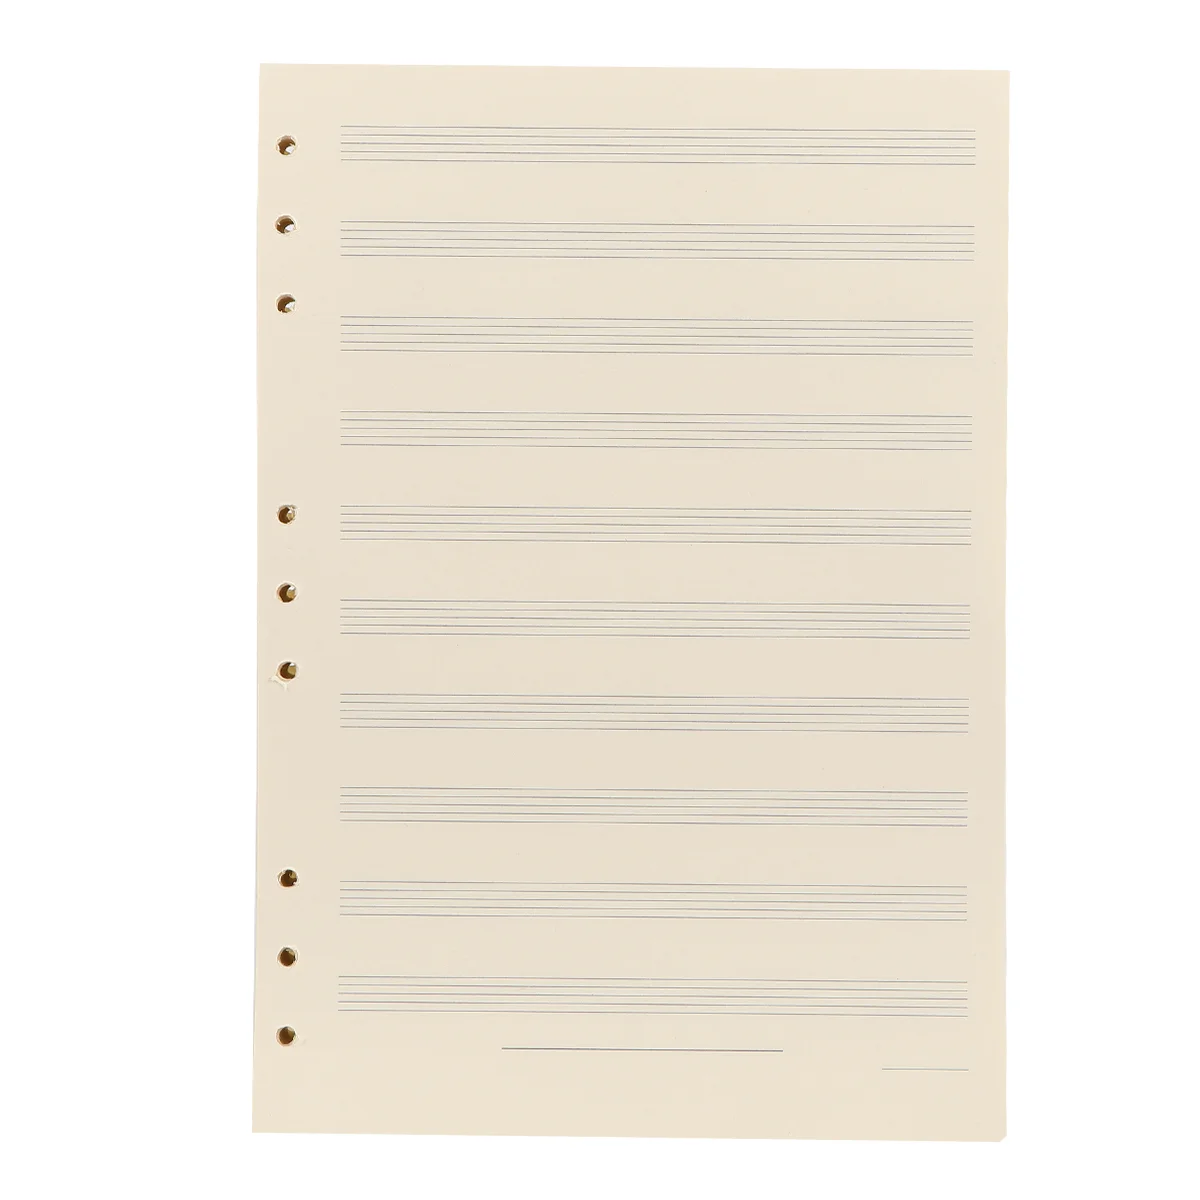 Paper Manuscript Music Refill Blank Staff Notebook Loose Leaf Sheet Musical Writting Song Acessories Practical Composition